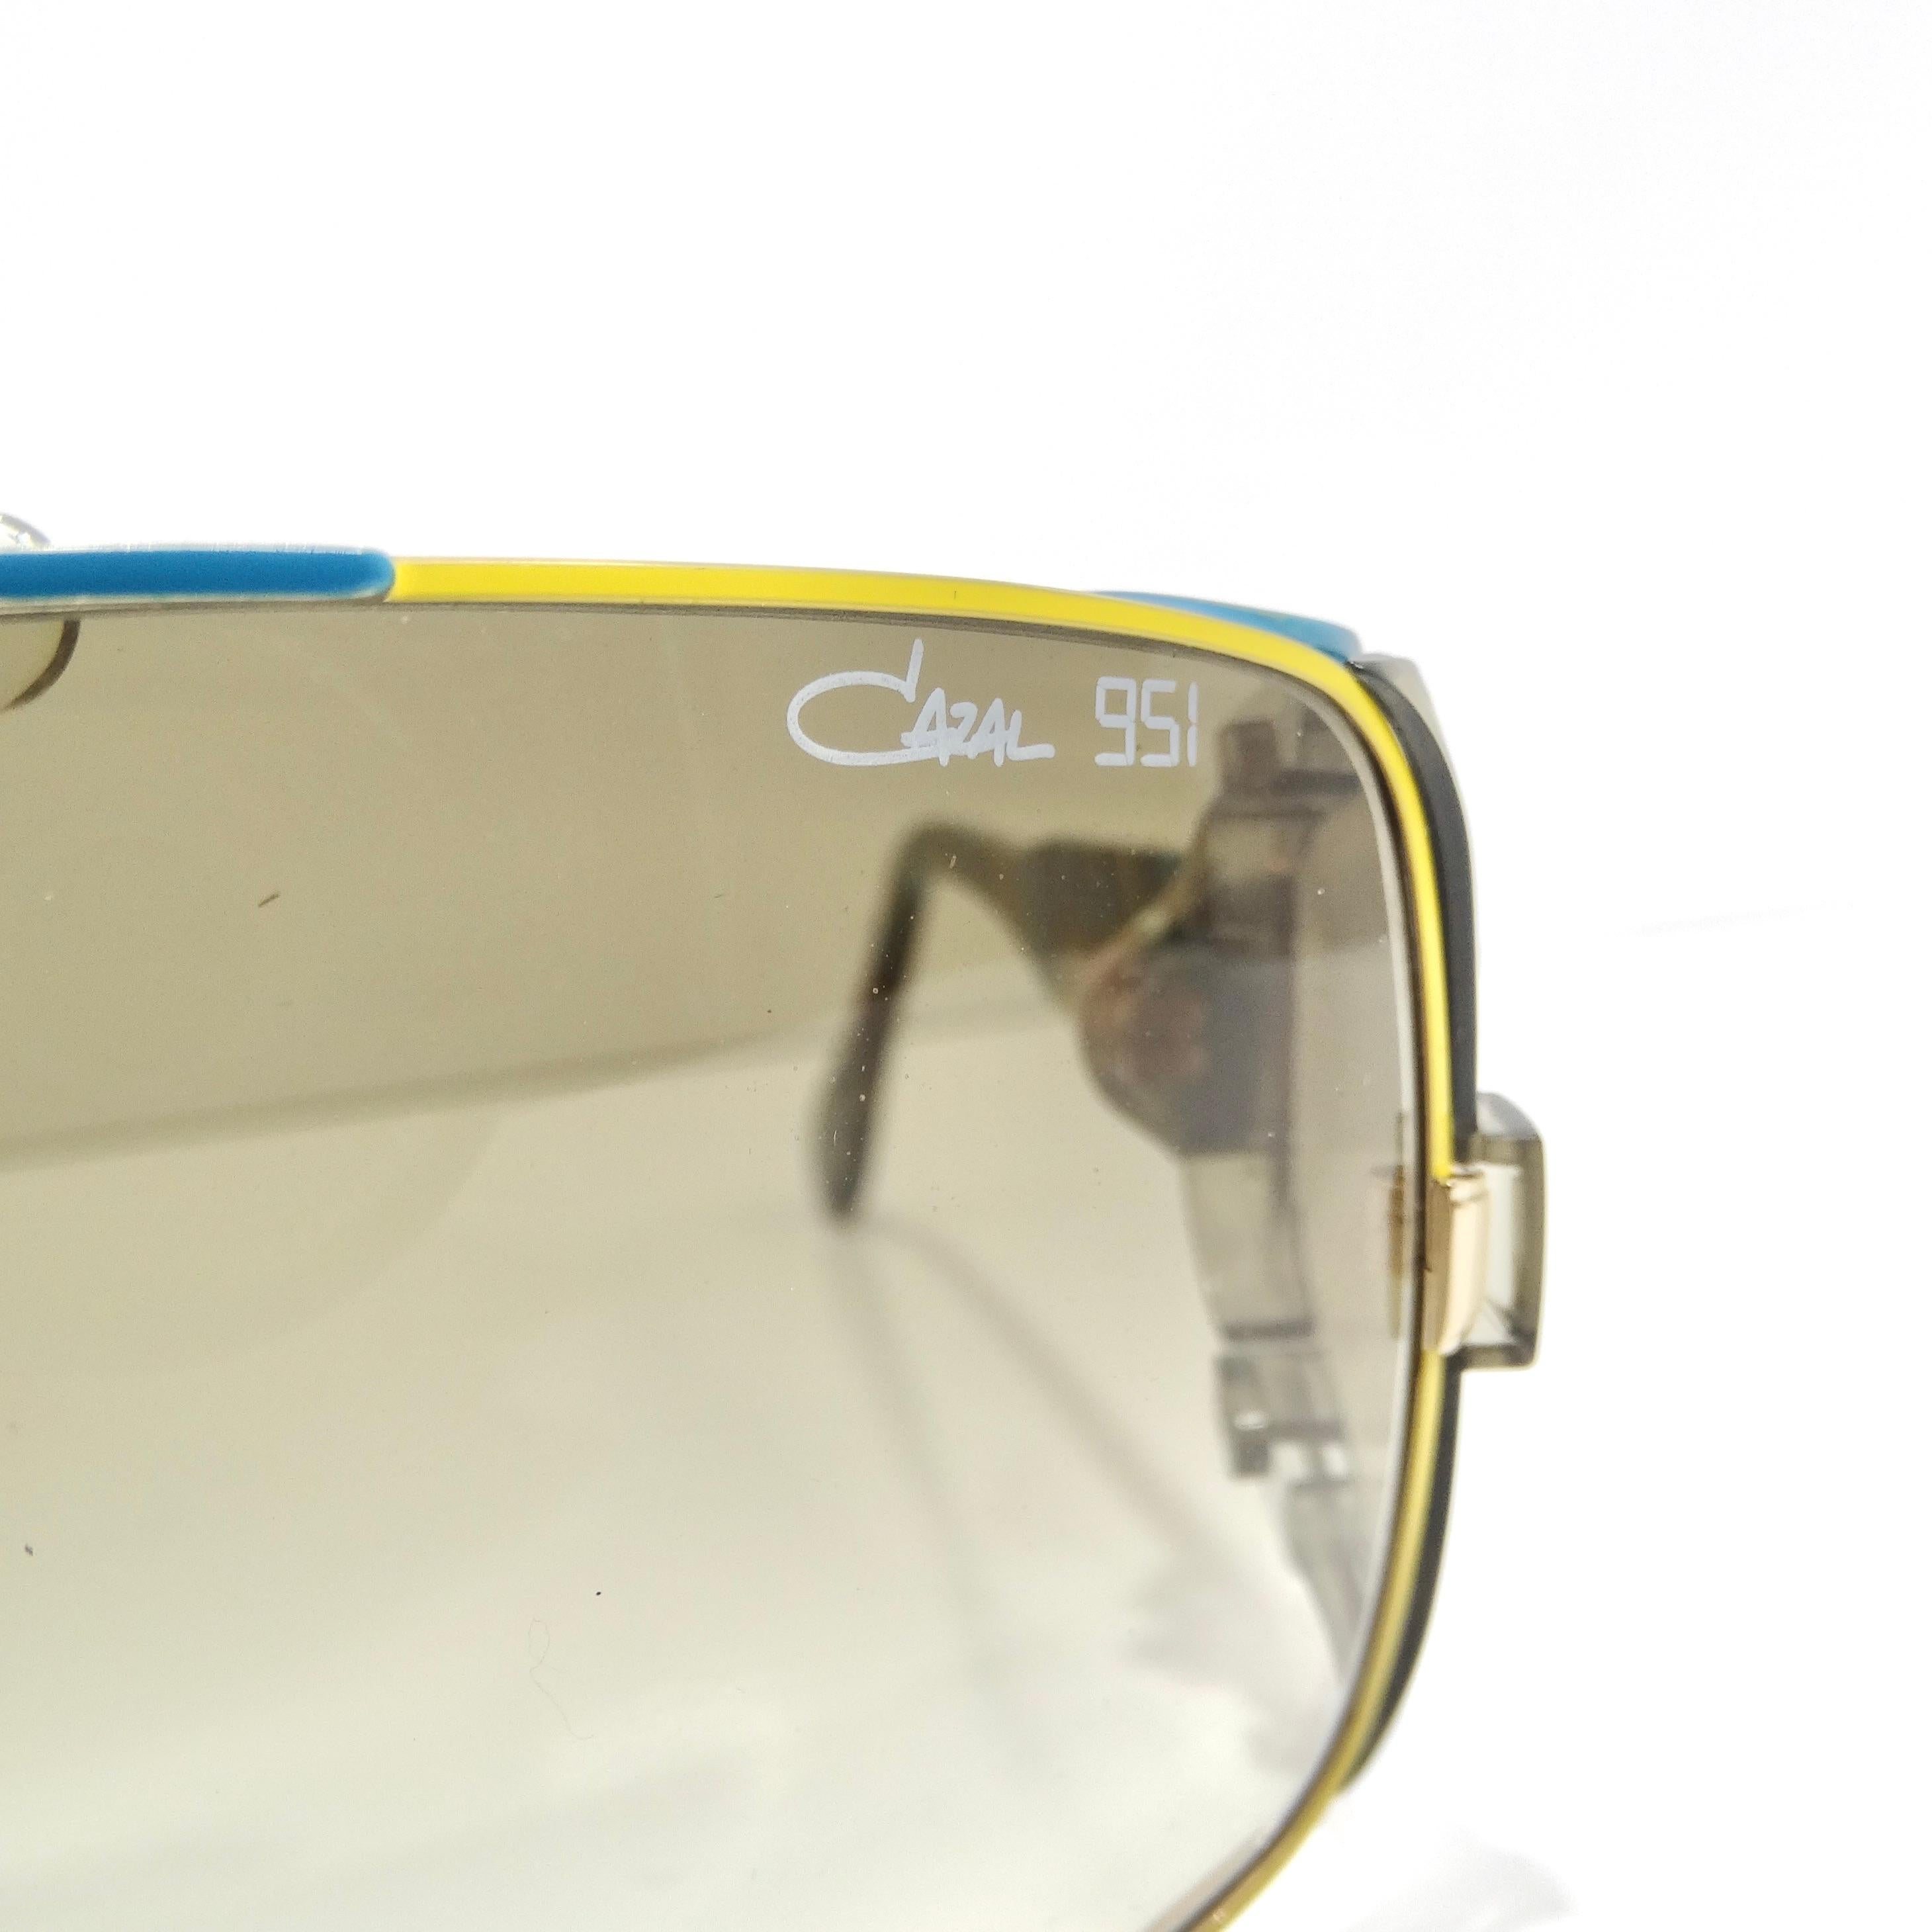 Introducing the Cazal 951 Limited Edition Sunglasses, a striking and super unique addition to your eyewear collection. These sunglasses are crafted with meticulous attention to detail, featuring rectangular lenses adorned with thin yellow and blue